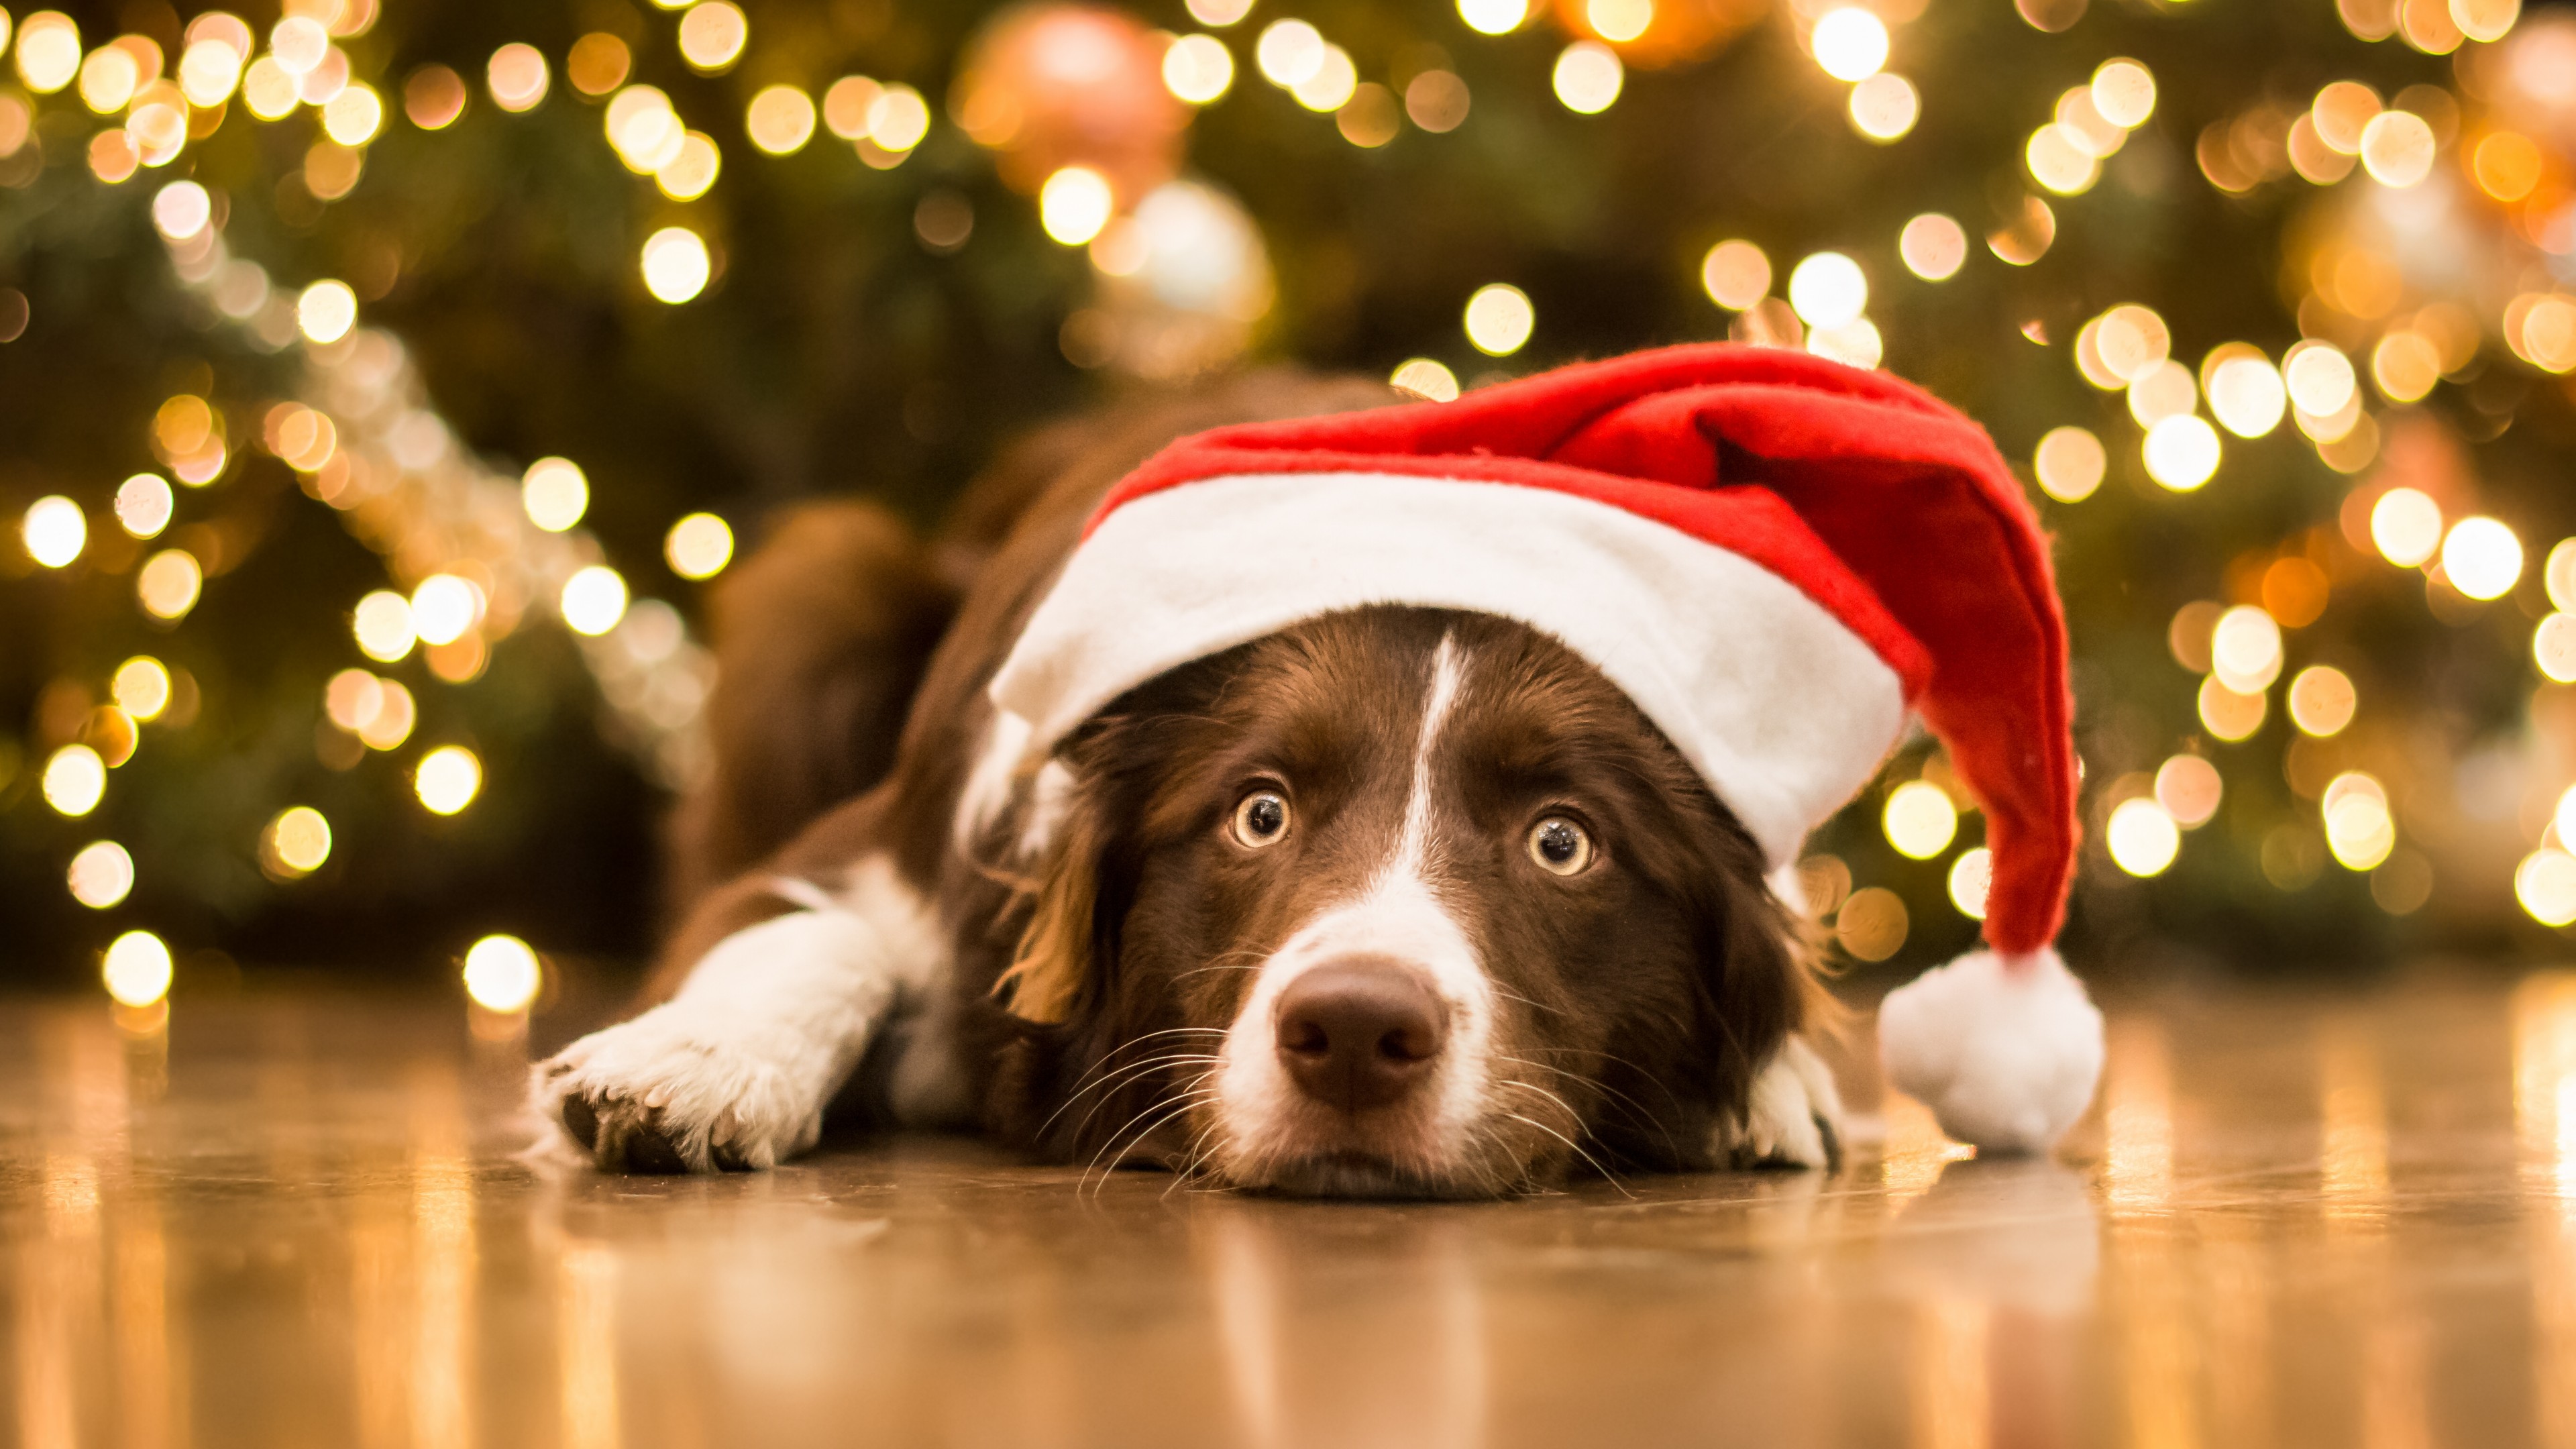 46] Christmas Wallpaper with Dogs on